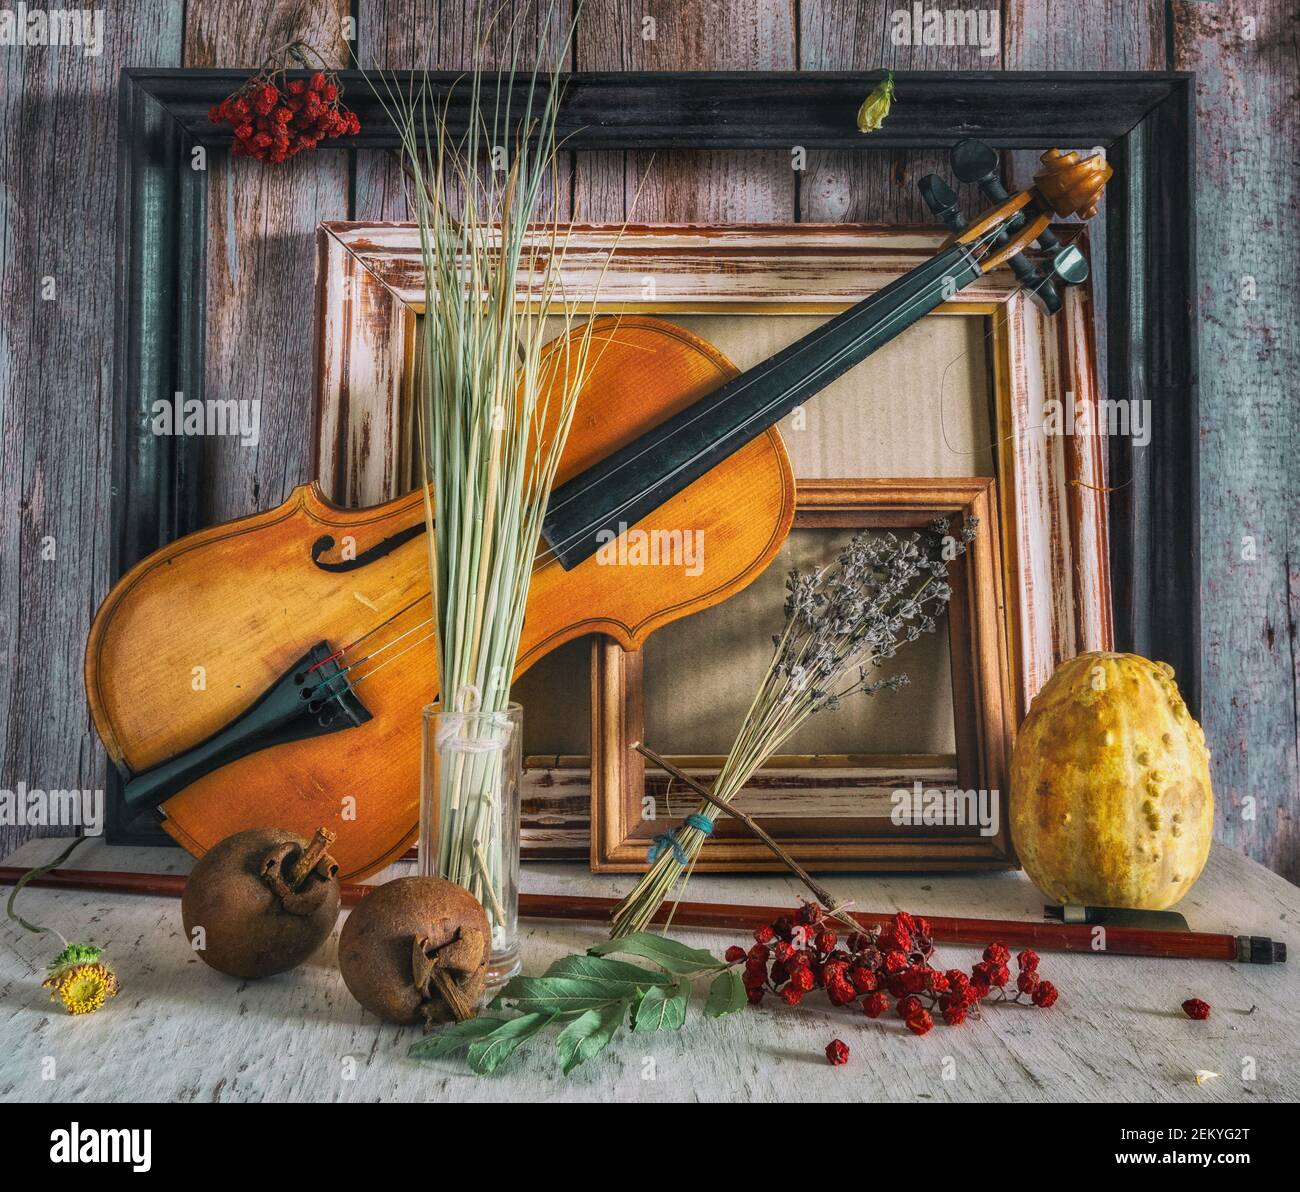 Still life with old things. Violin with torn strings. Shabby wooden frames. Dried plants. Vintage. Retro. Stock Photo